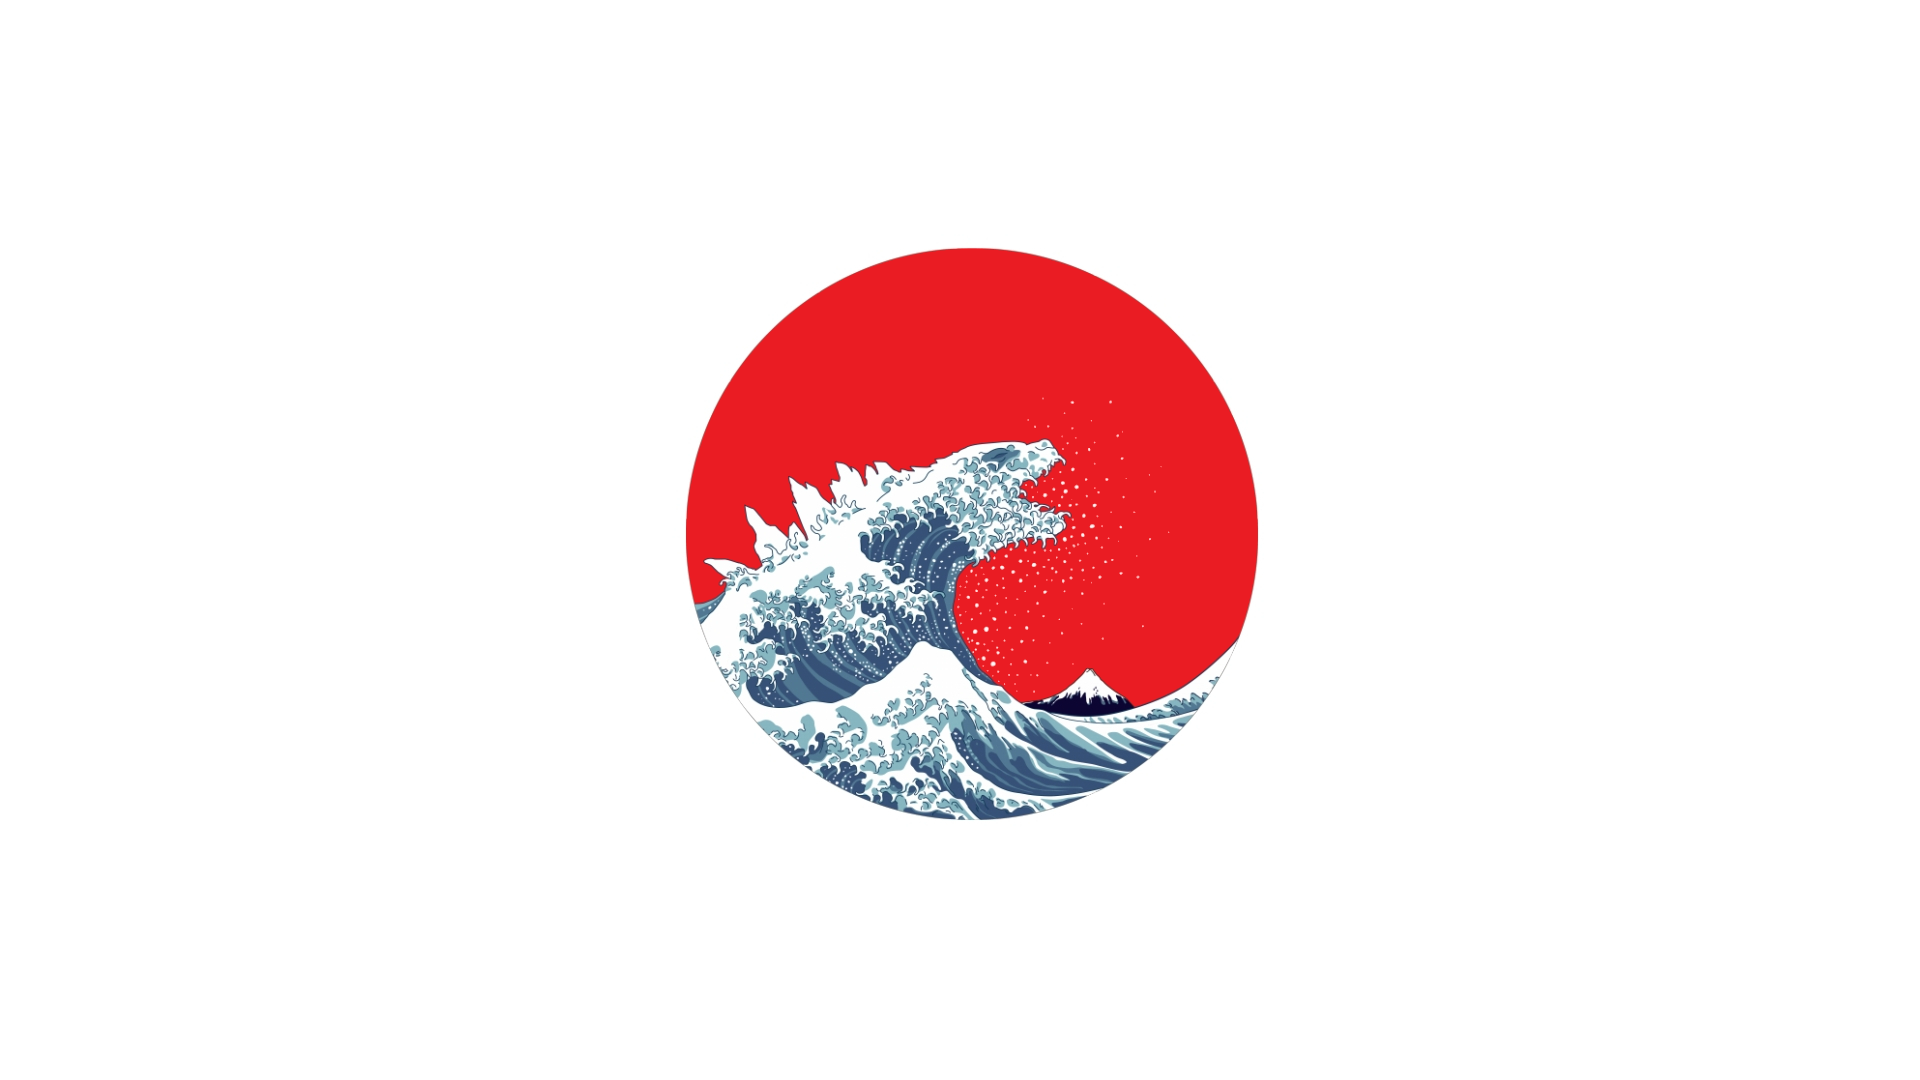 The Great Wave of Kaiju [1920x1080]